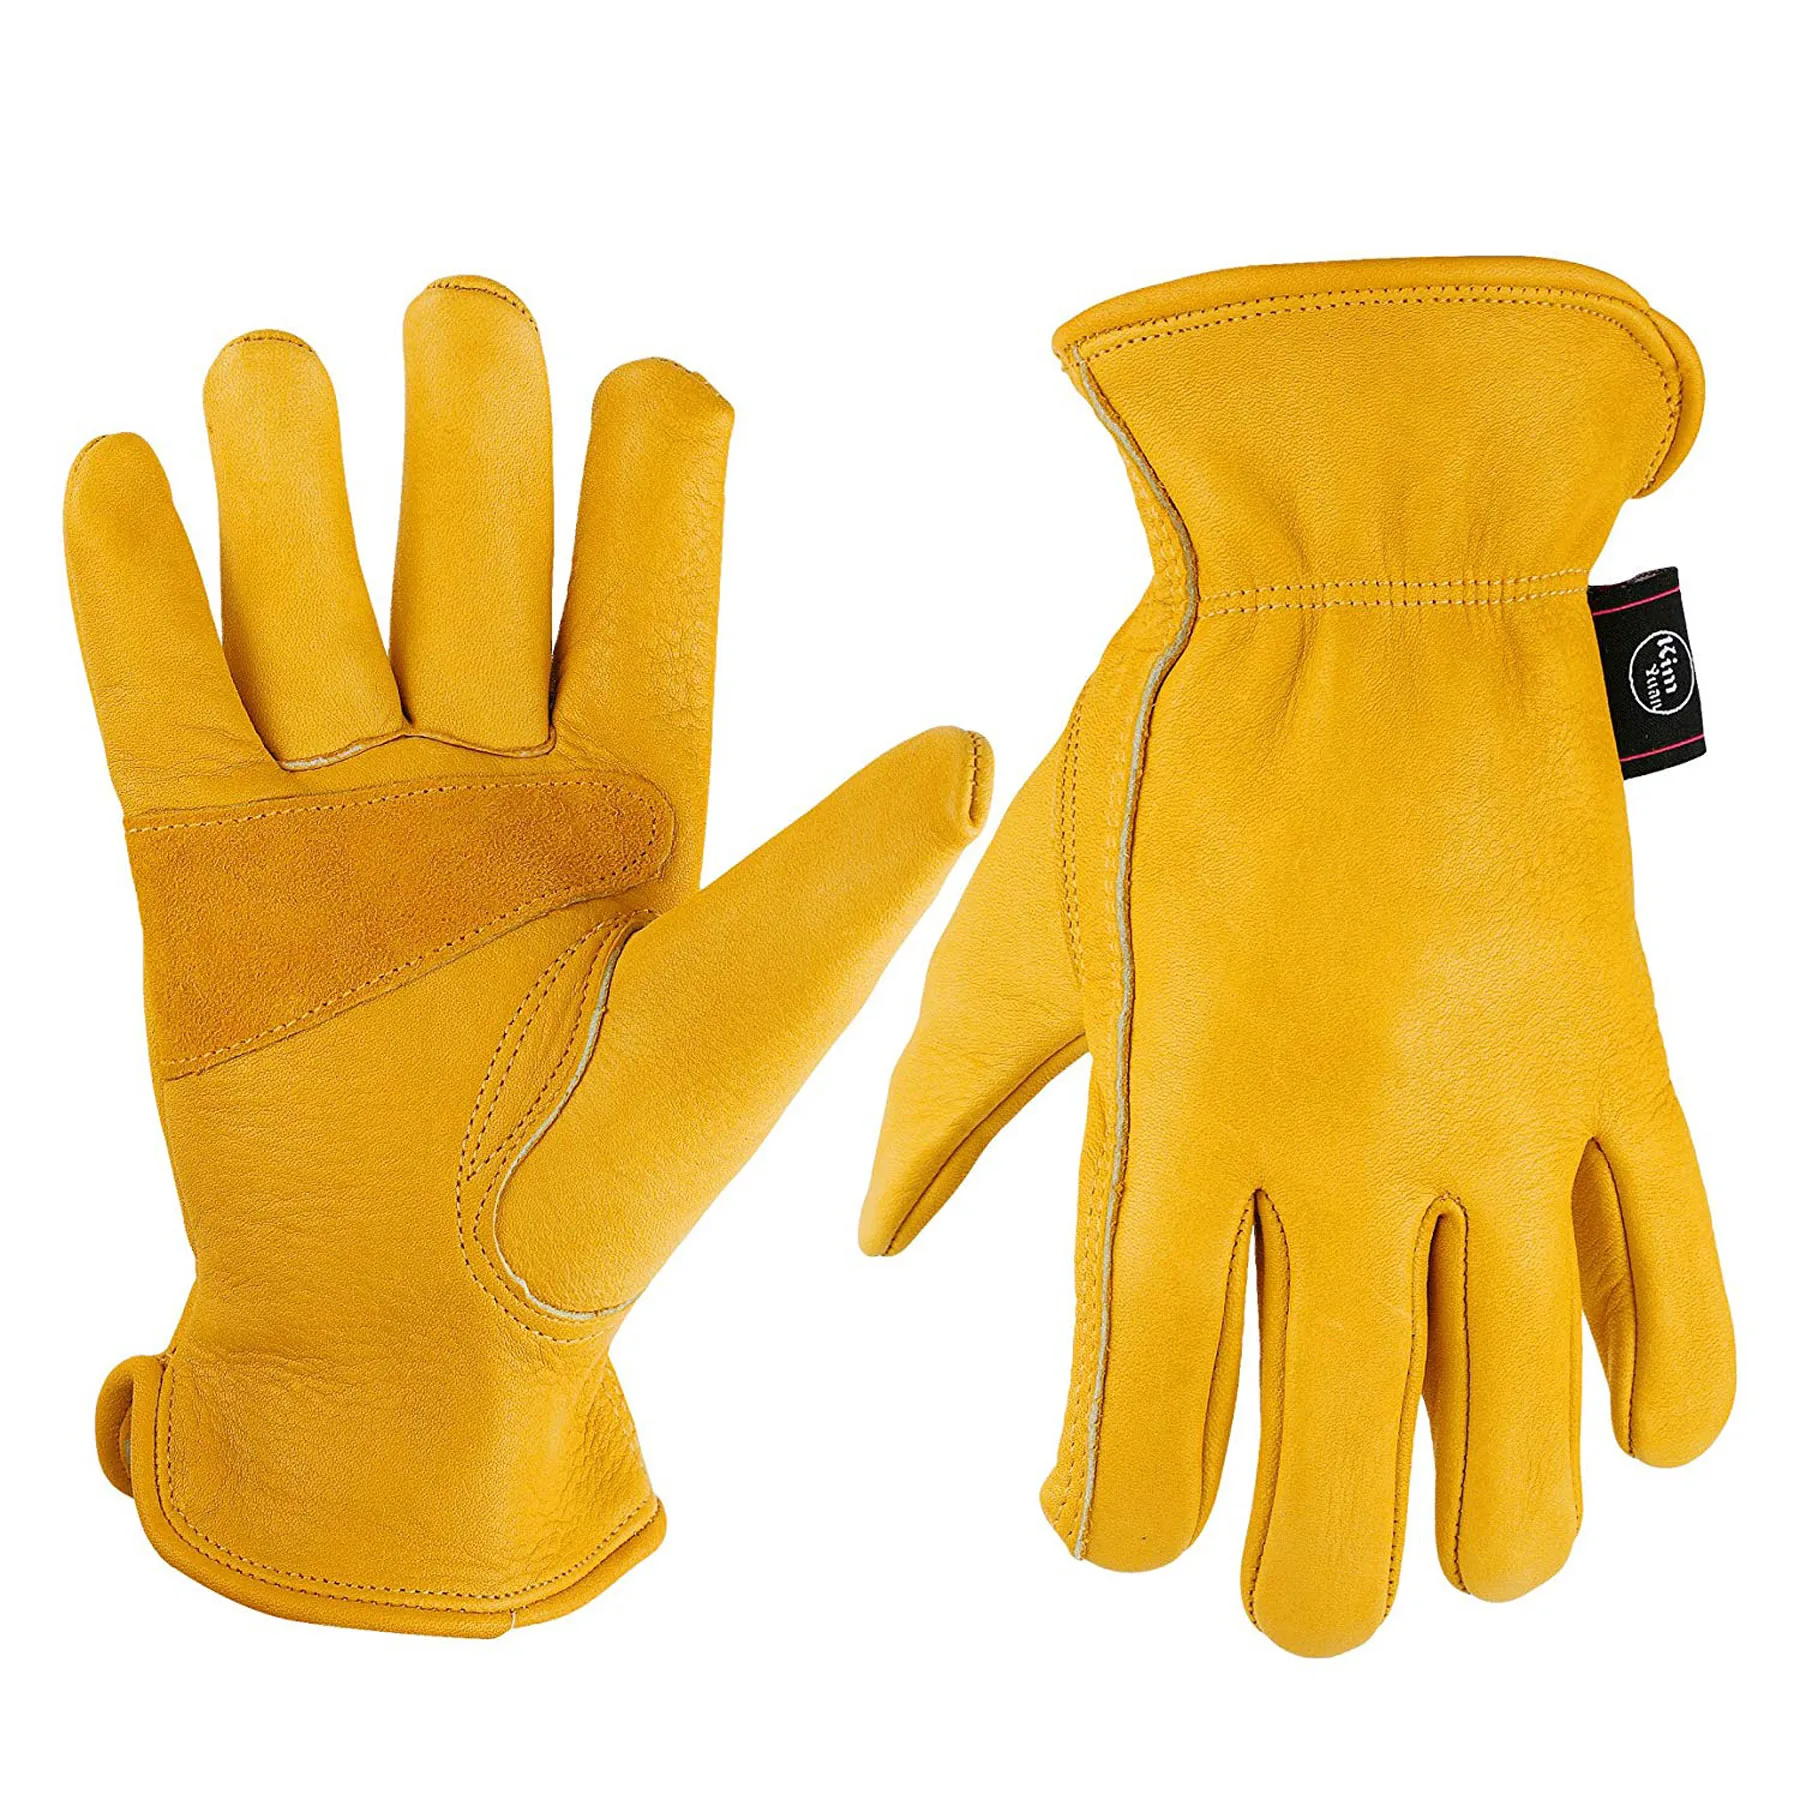 Work Gloves Cowhide Leather Men Working Welding Safety Protective Garden Sports MOTO Driver Wear-resisting Gloves qiangleaf brand new men s work gloves cowhide leather security protection wear men safety driver working welding glove 3zg